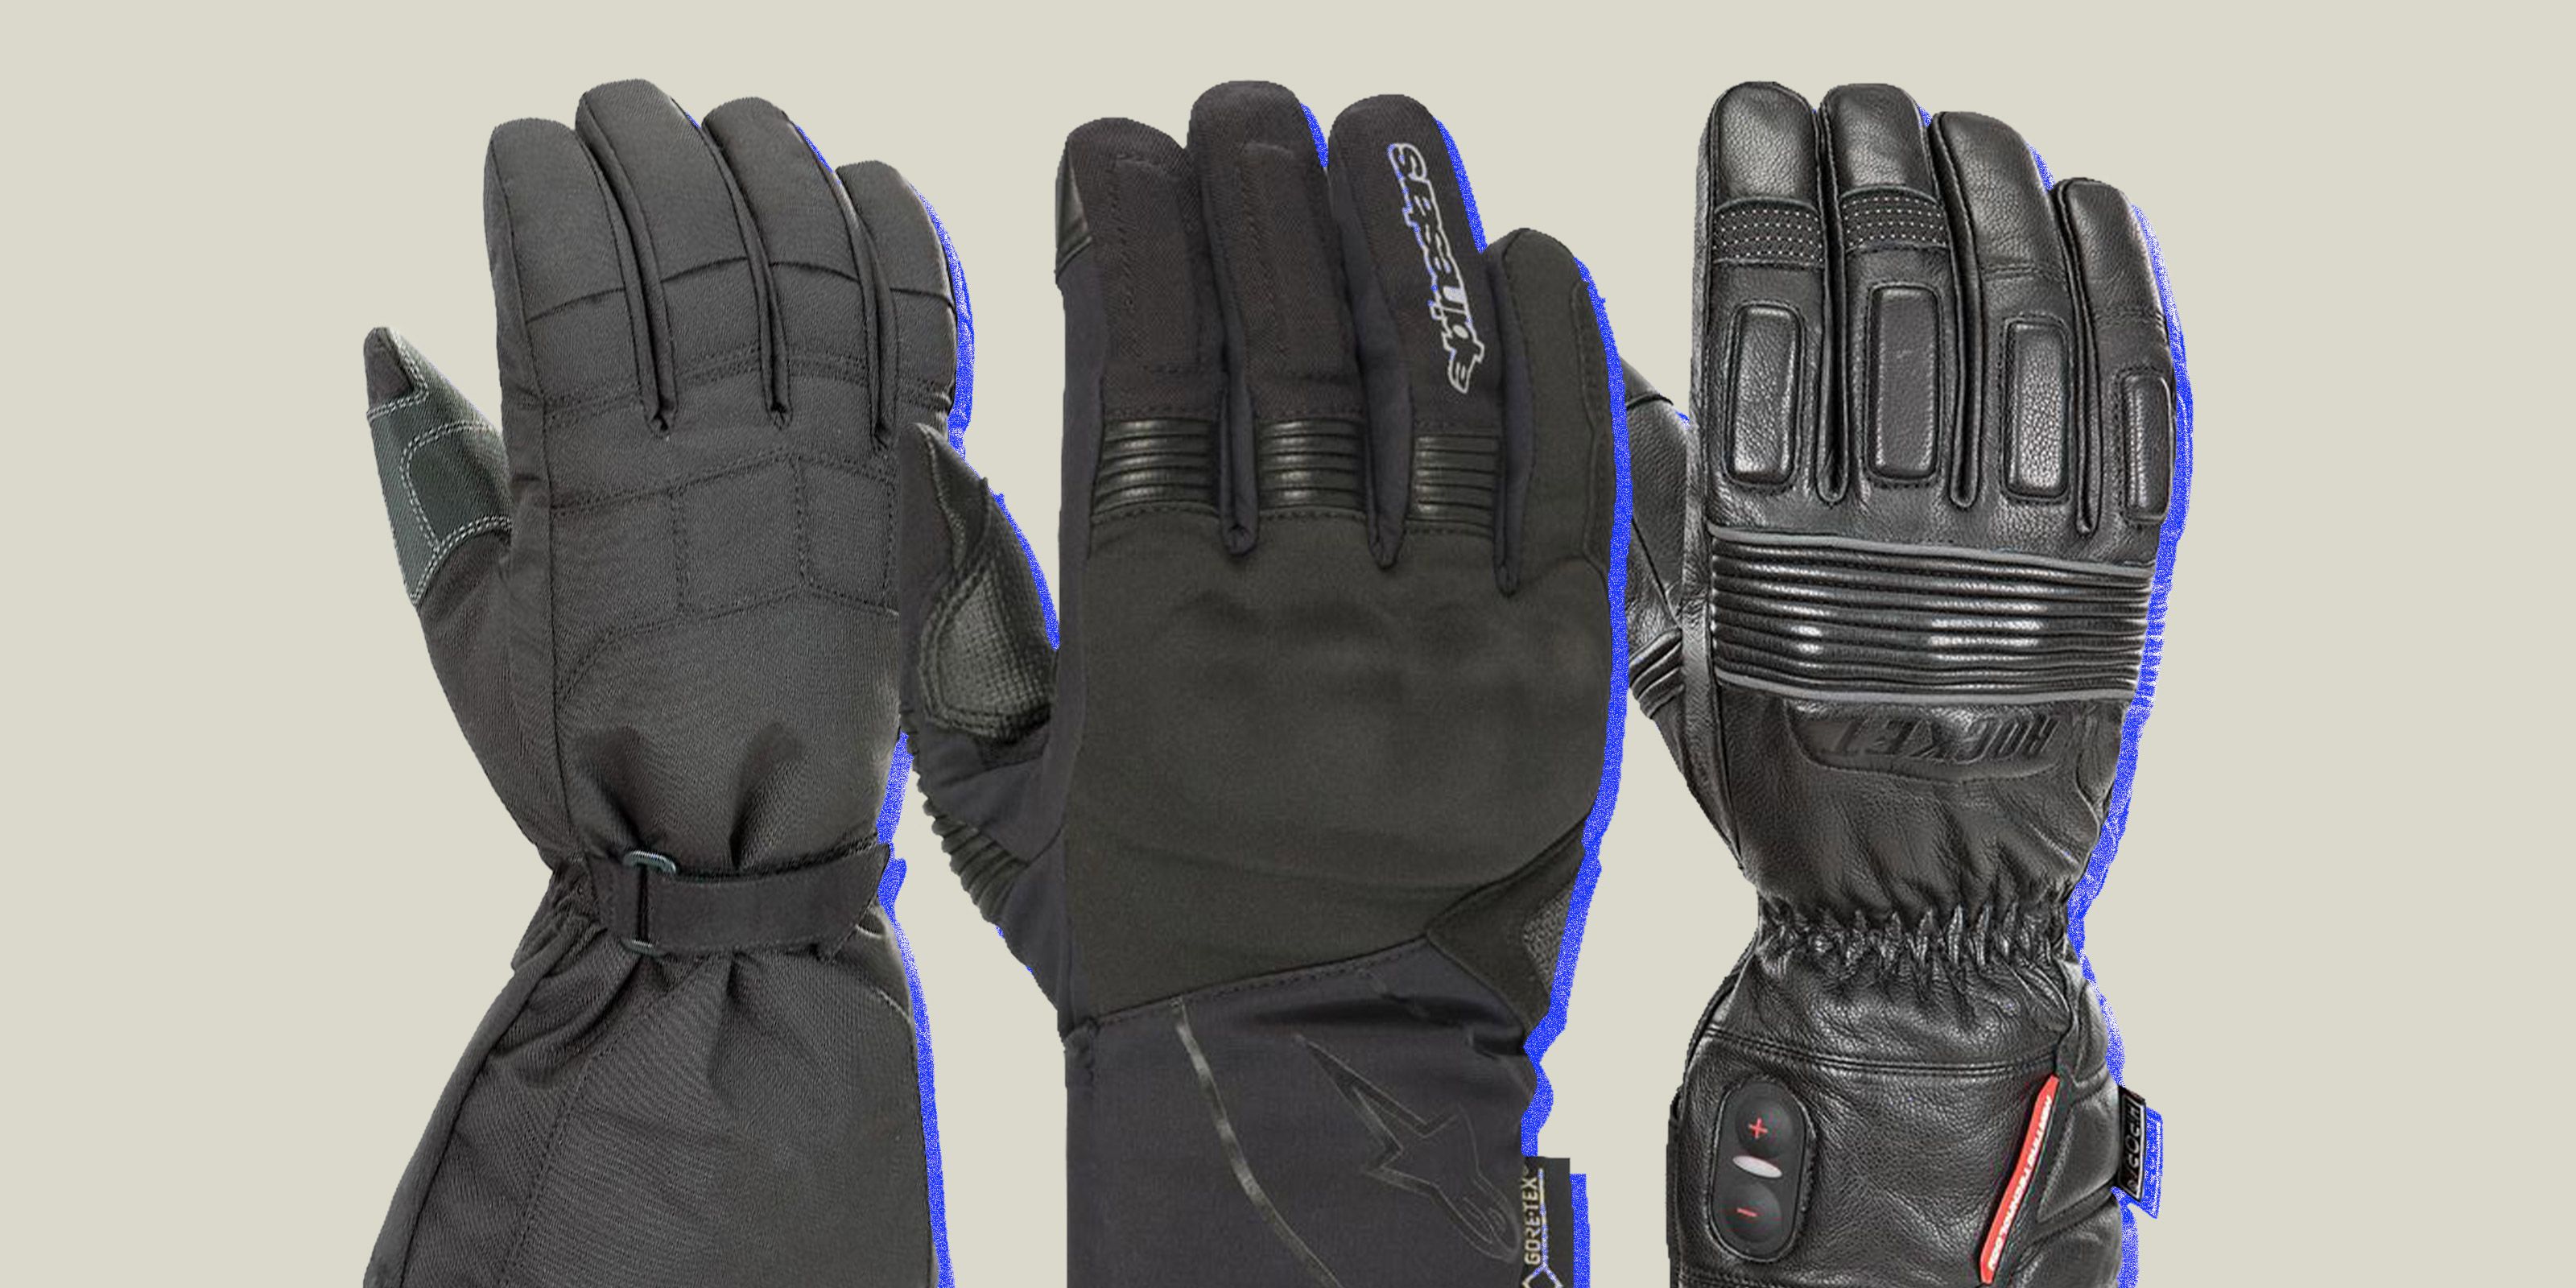 Mens Warm Winter Gloves Motorcycle Driving Cold Weather Glove Thermal Lining MRX 